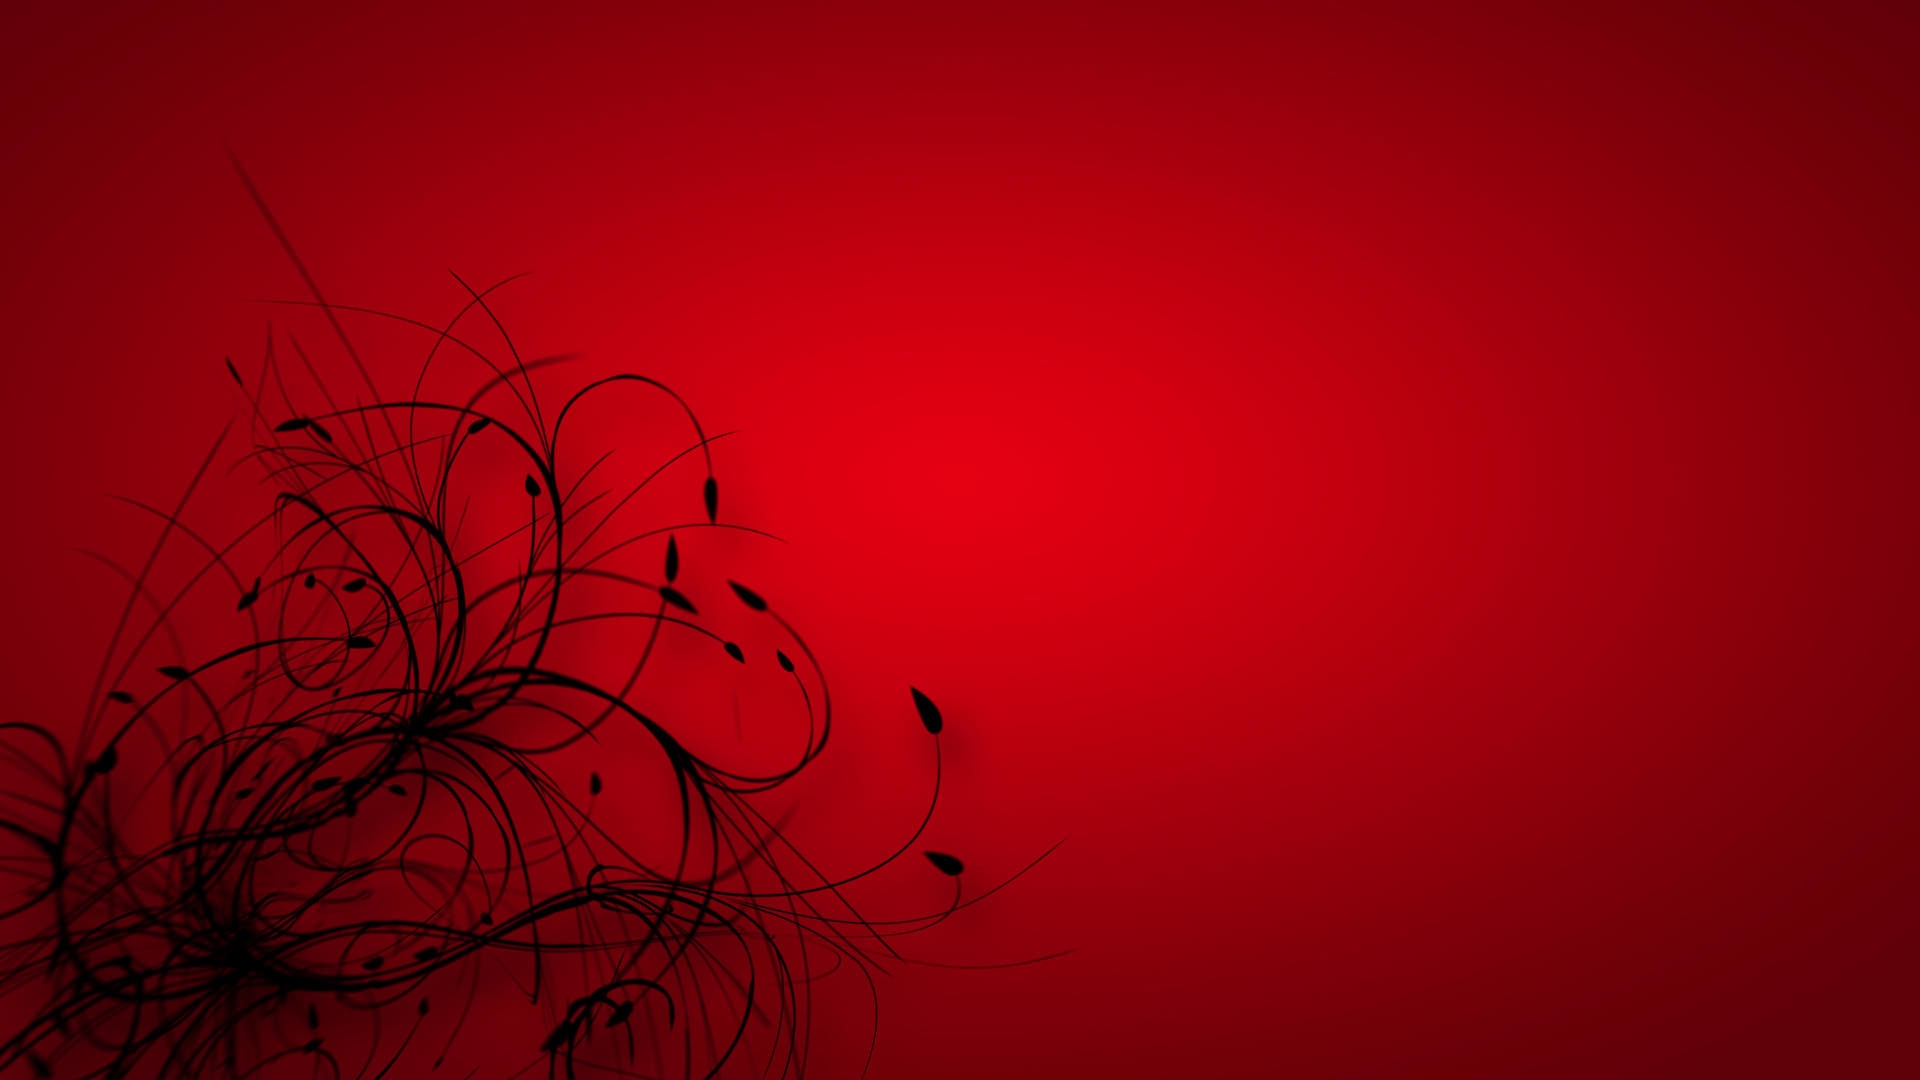 22+ Red & Black Wallpapers, Backgrounds, Images | FreeCreatives